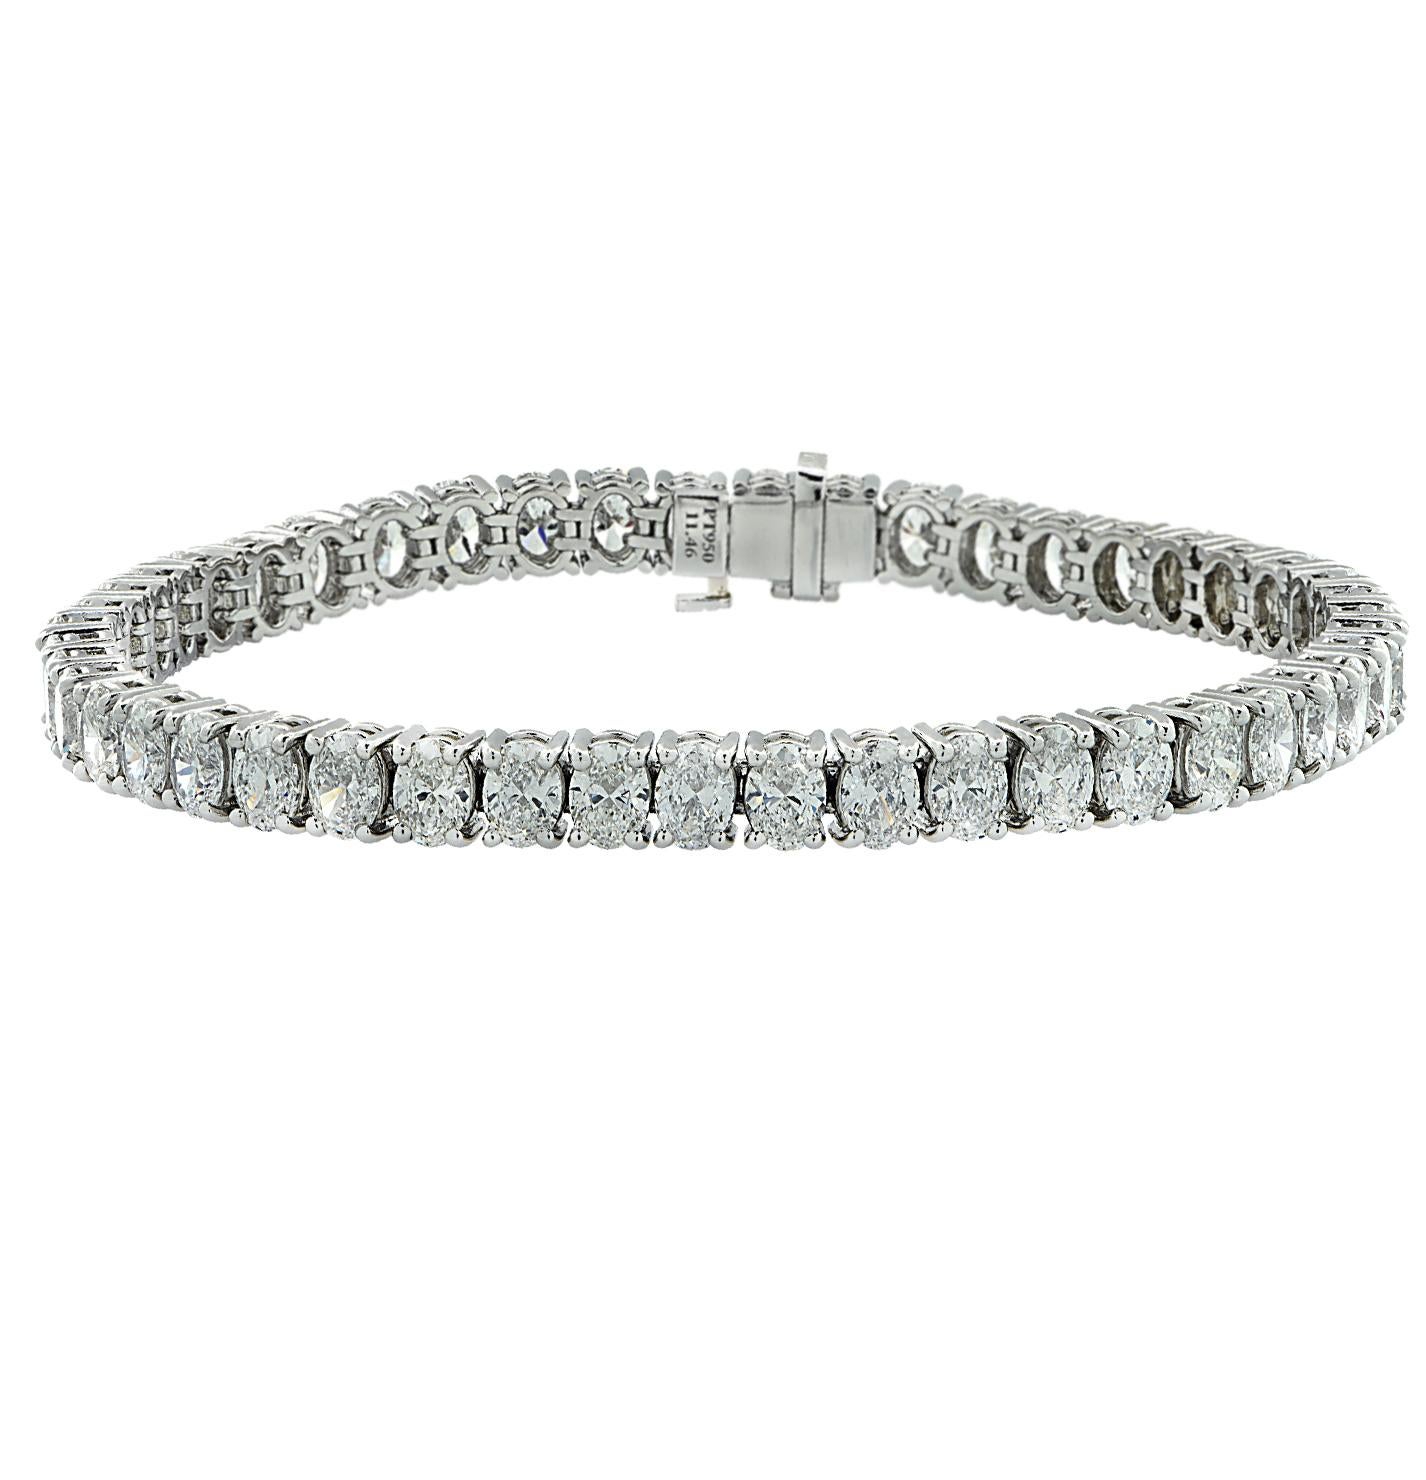 Exquisite diamond tennis bracelet crafted in platinum, showcasing 46 stunning oval cut diamonds weighing 11.23 carats total, E-F color, VS clarity. Each diamond is carefully selected, perfectly matched and set in a seamless eternity of diamonds,